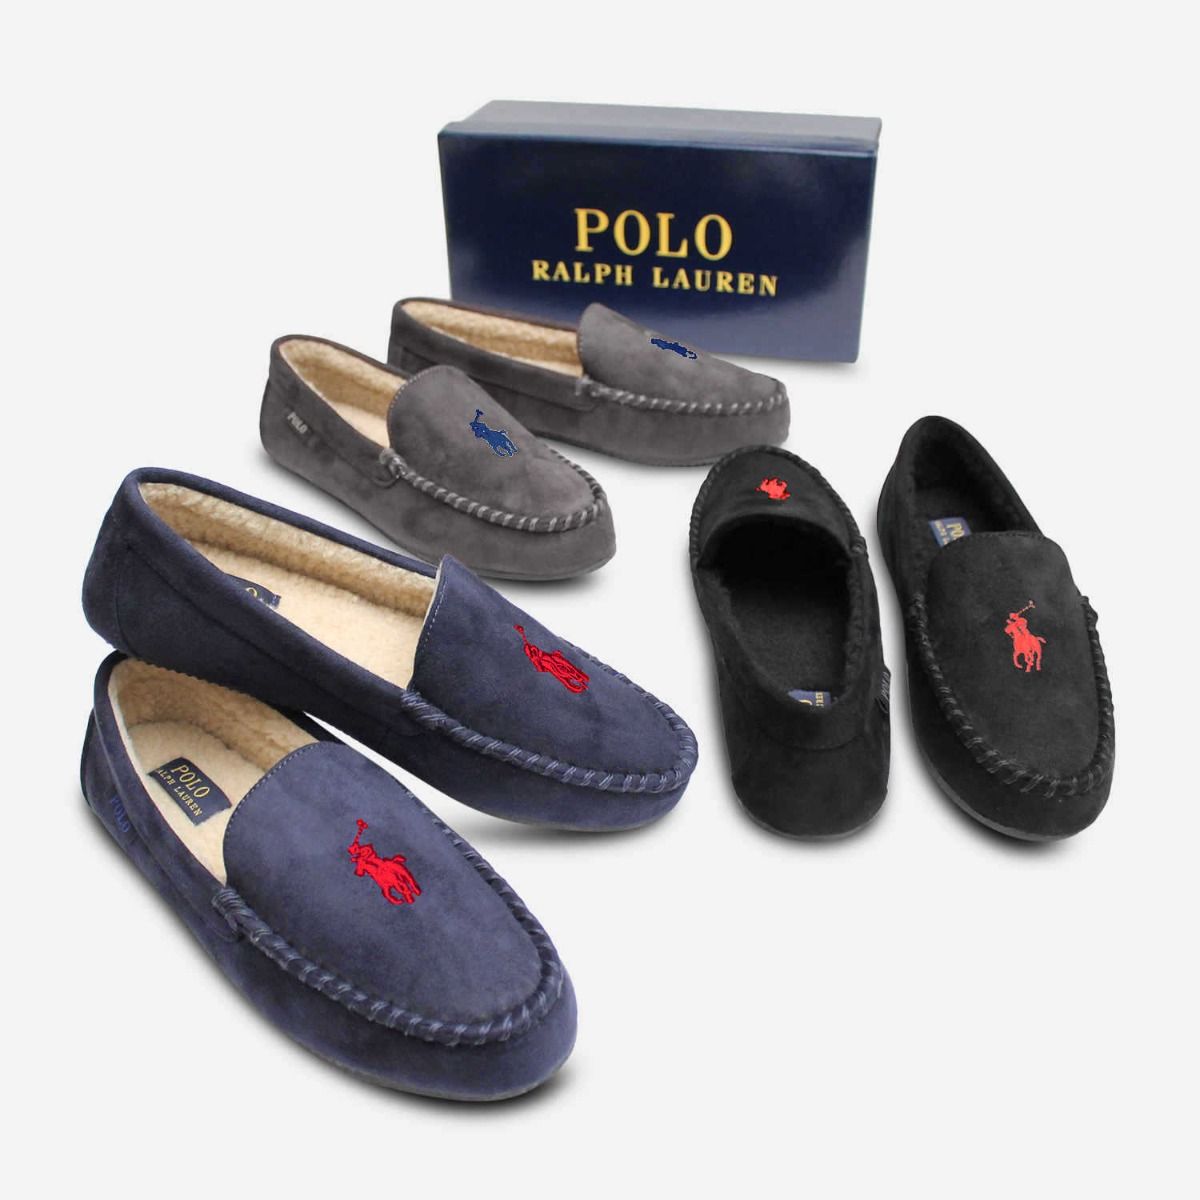 Ralph Lauren Polo Navy Blue Mens Slippers with Warm Lining